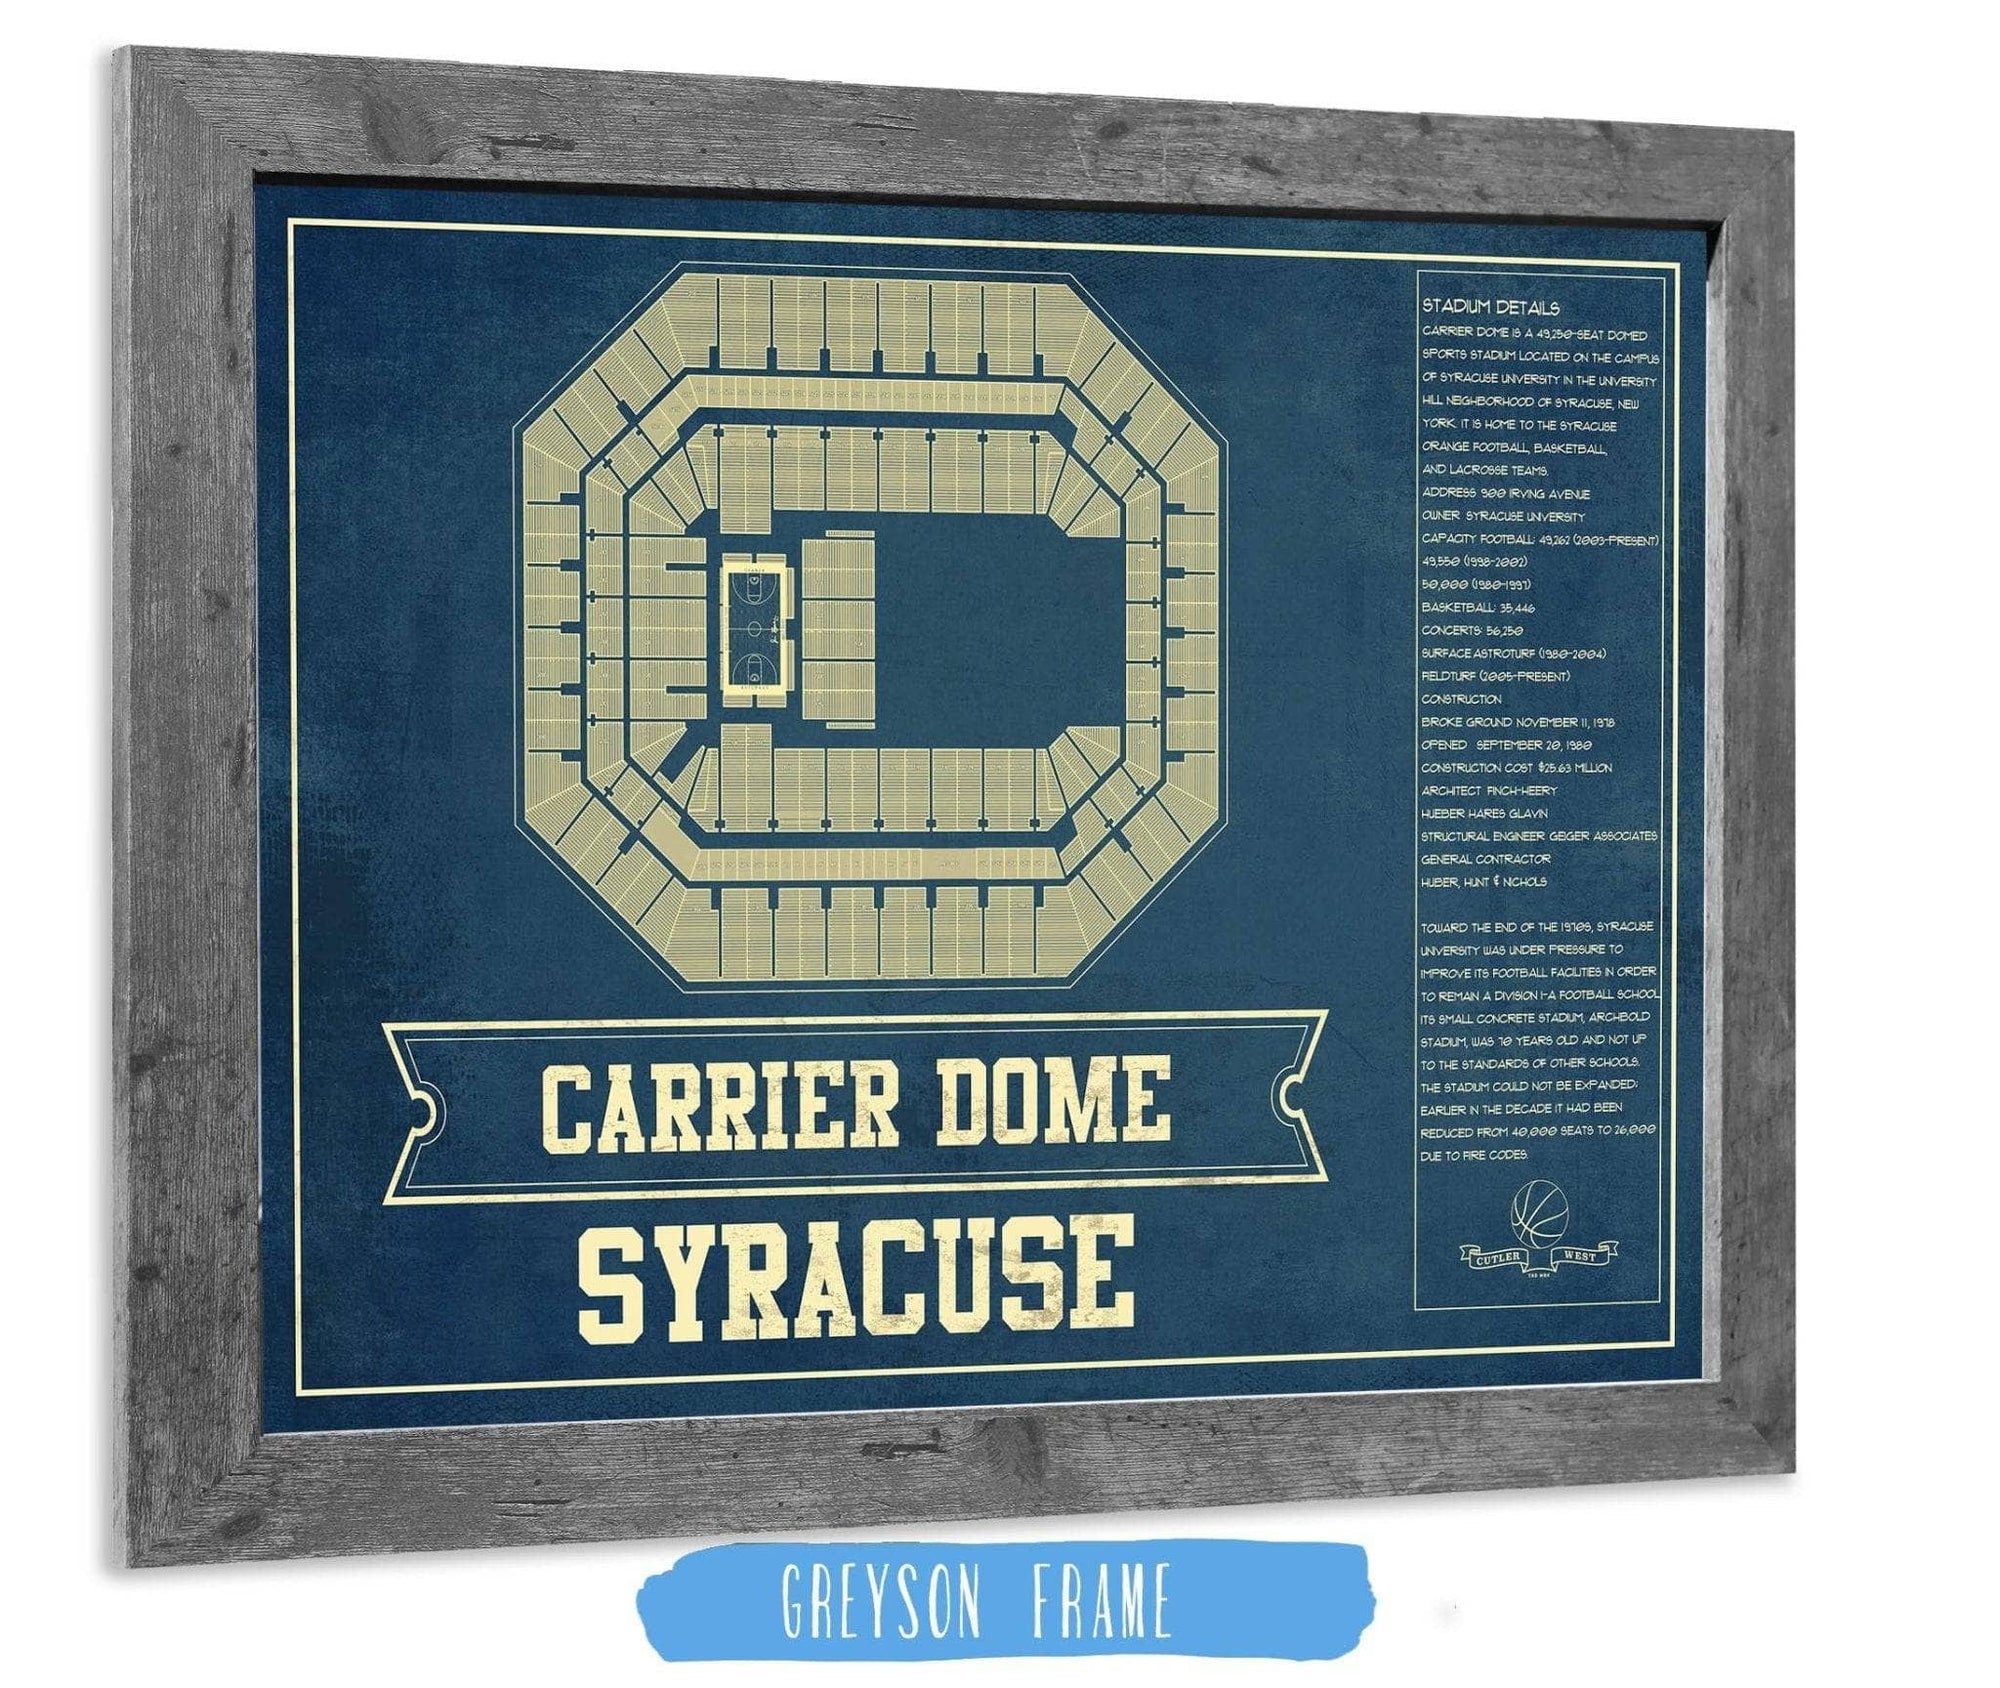 Cutler West Basketball Collection 14" x 11" / Greyson Frame Syracuse Orange - Carrier Dome Seating Chart - College Basketball Blueprint Art 675915943_82113